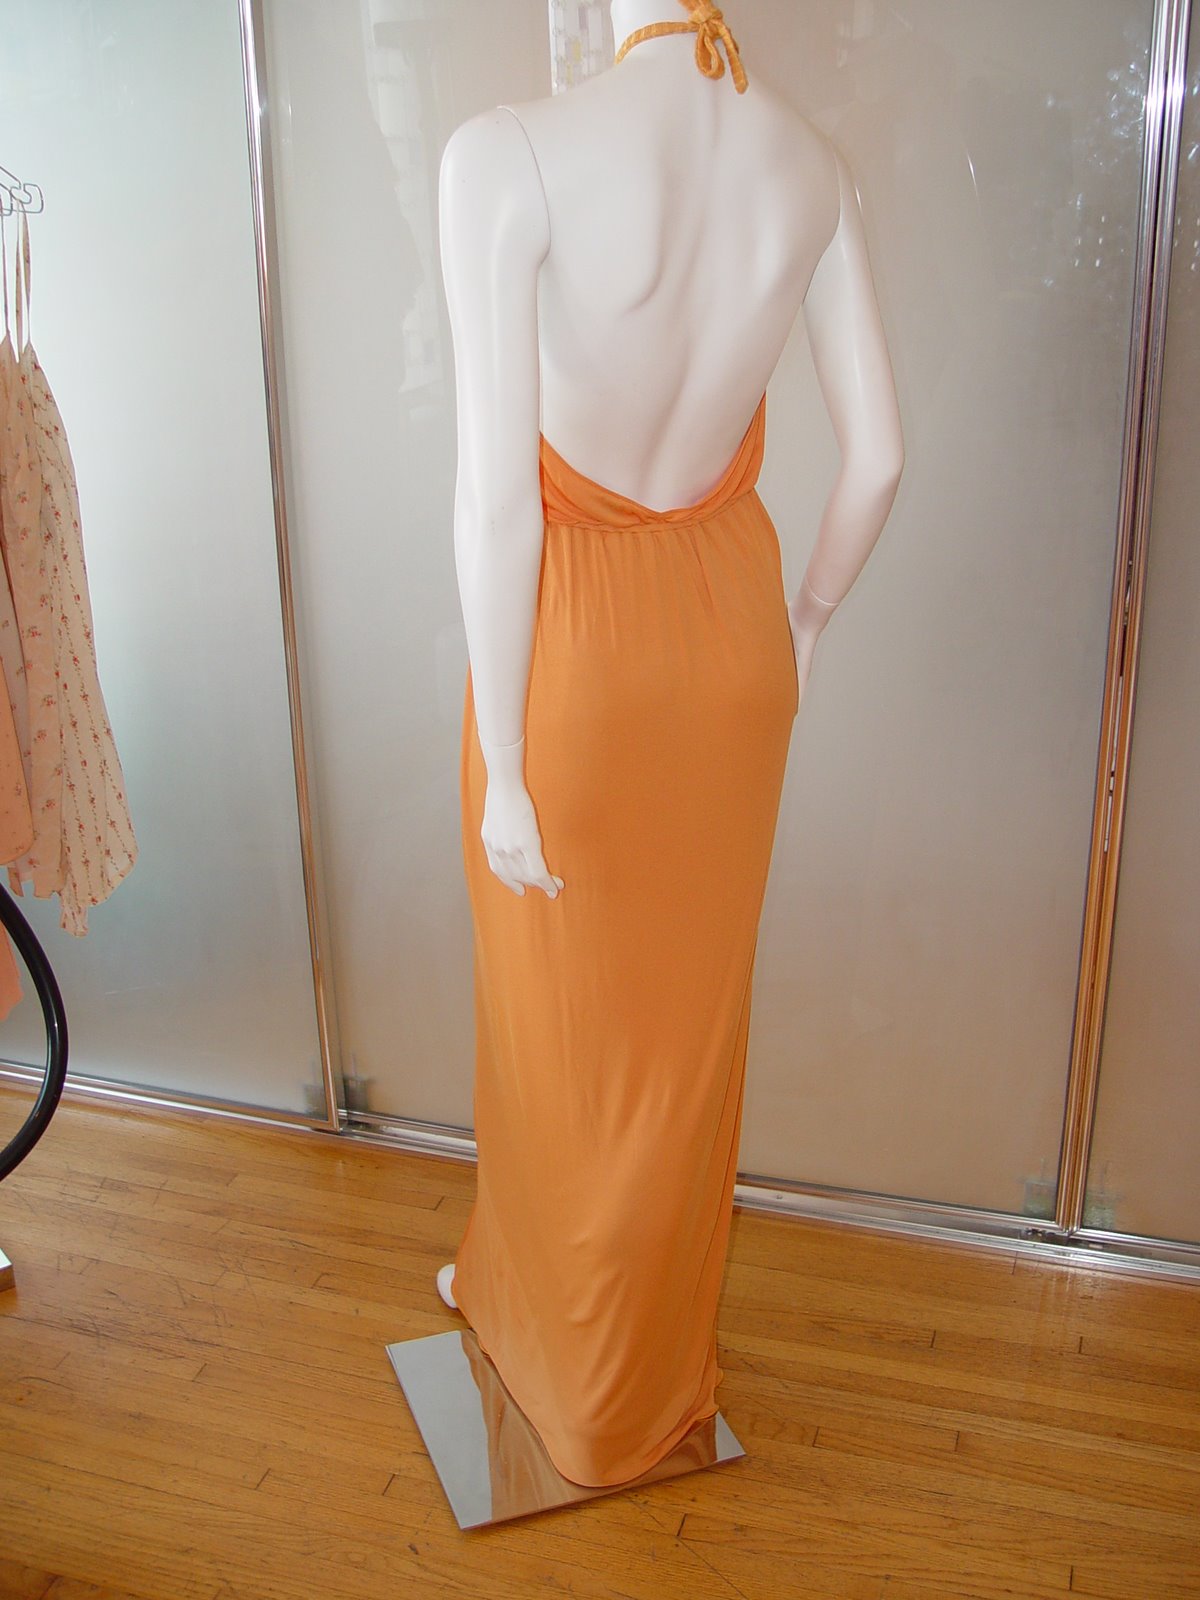 [CALLAGHAN++APRICOT+JERSEY+HALTER+WITH+KNIT+TRIM+DEADSTOCK+LATE+70S.JPG]